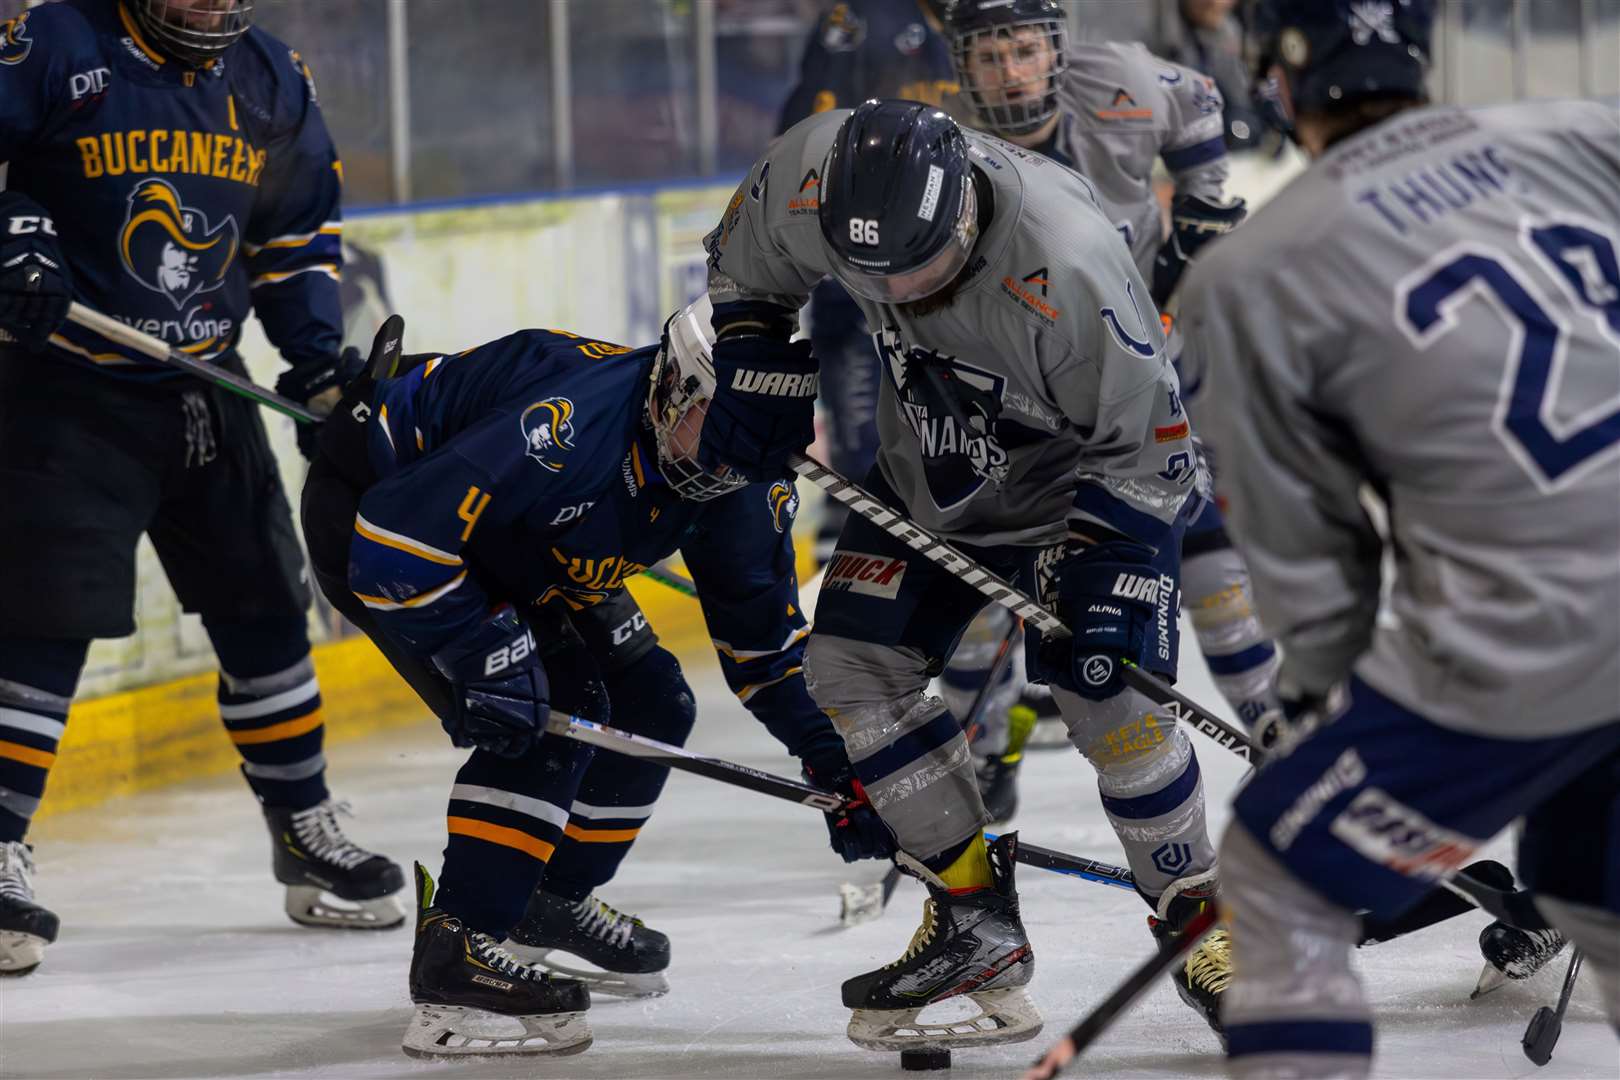 The Invicta Dynamos face a weekend double in the Southern Cup Picture: David Trevallion